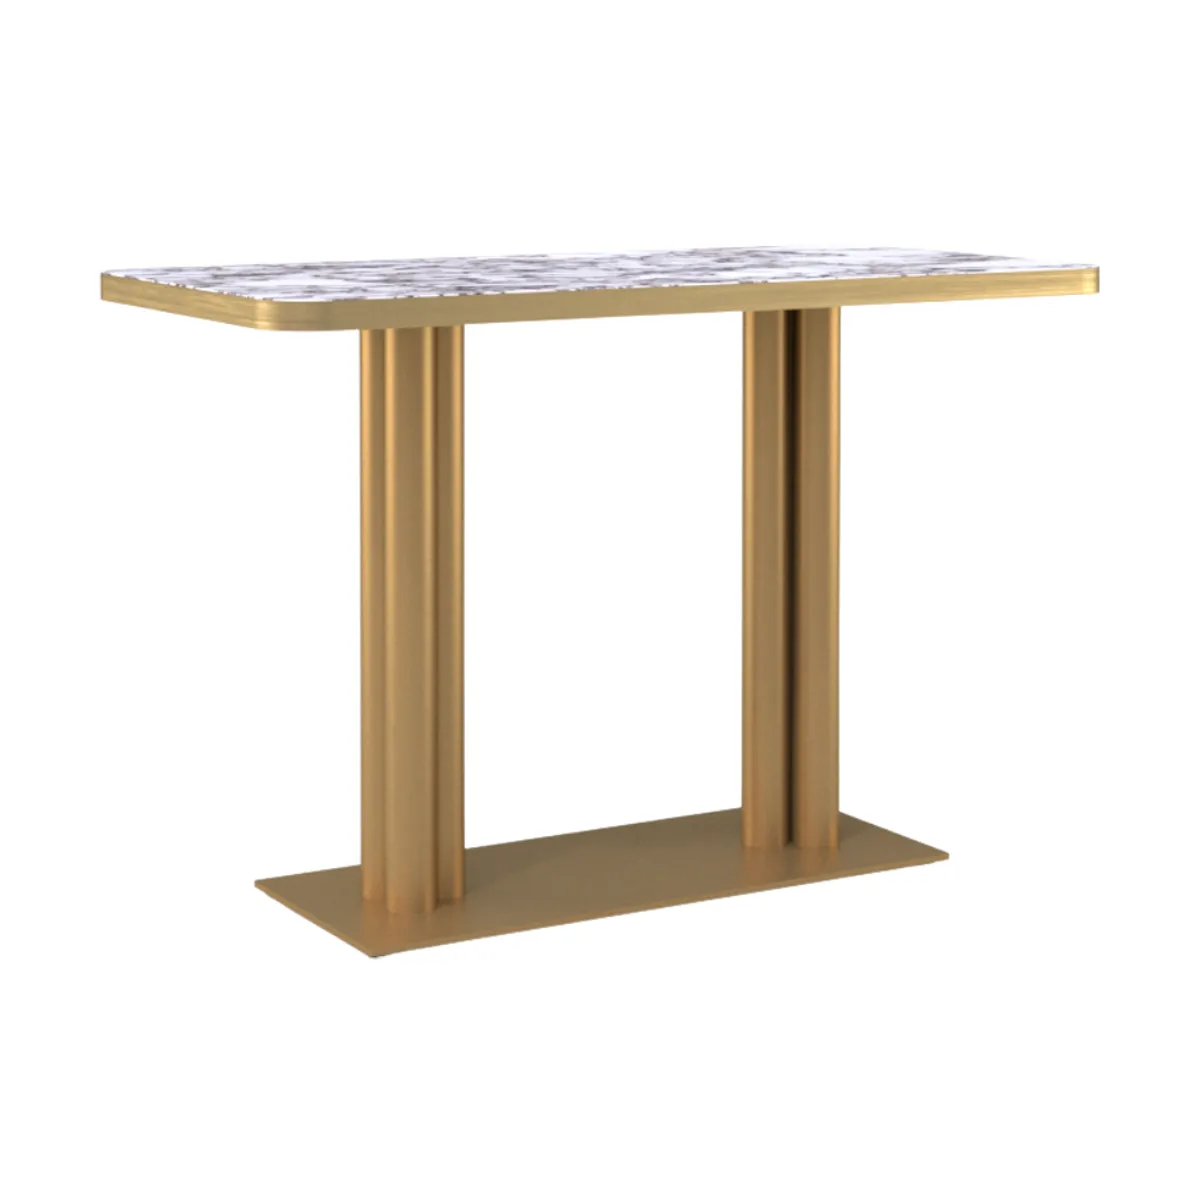 Gouqi brass rectangle dining table 1